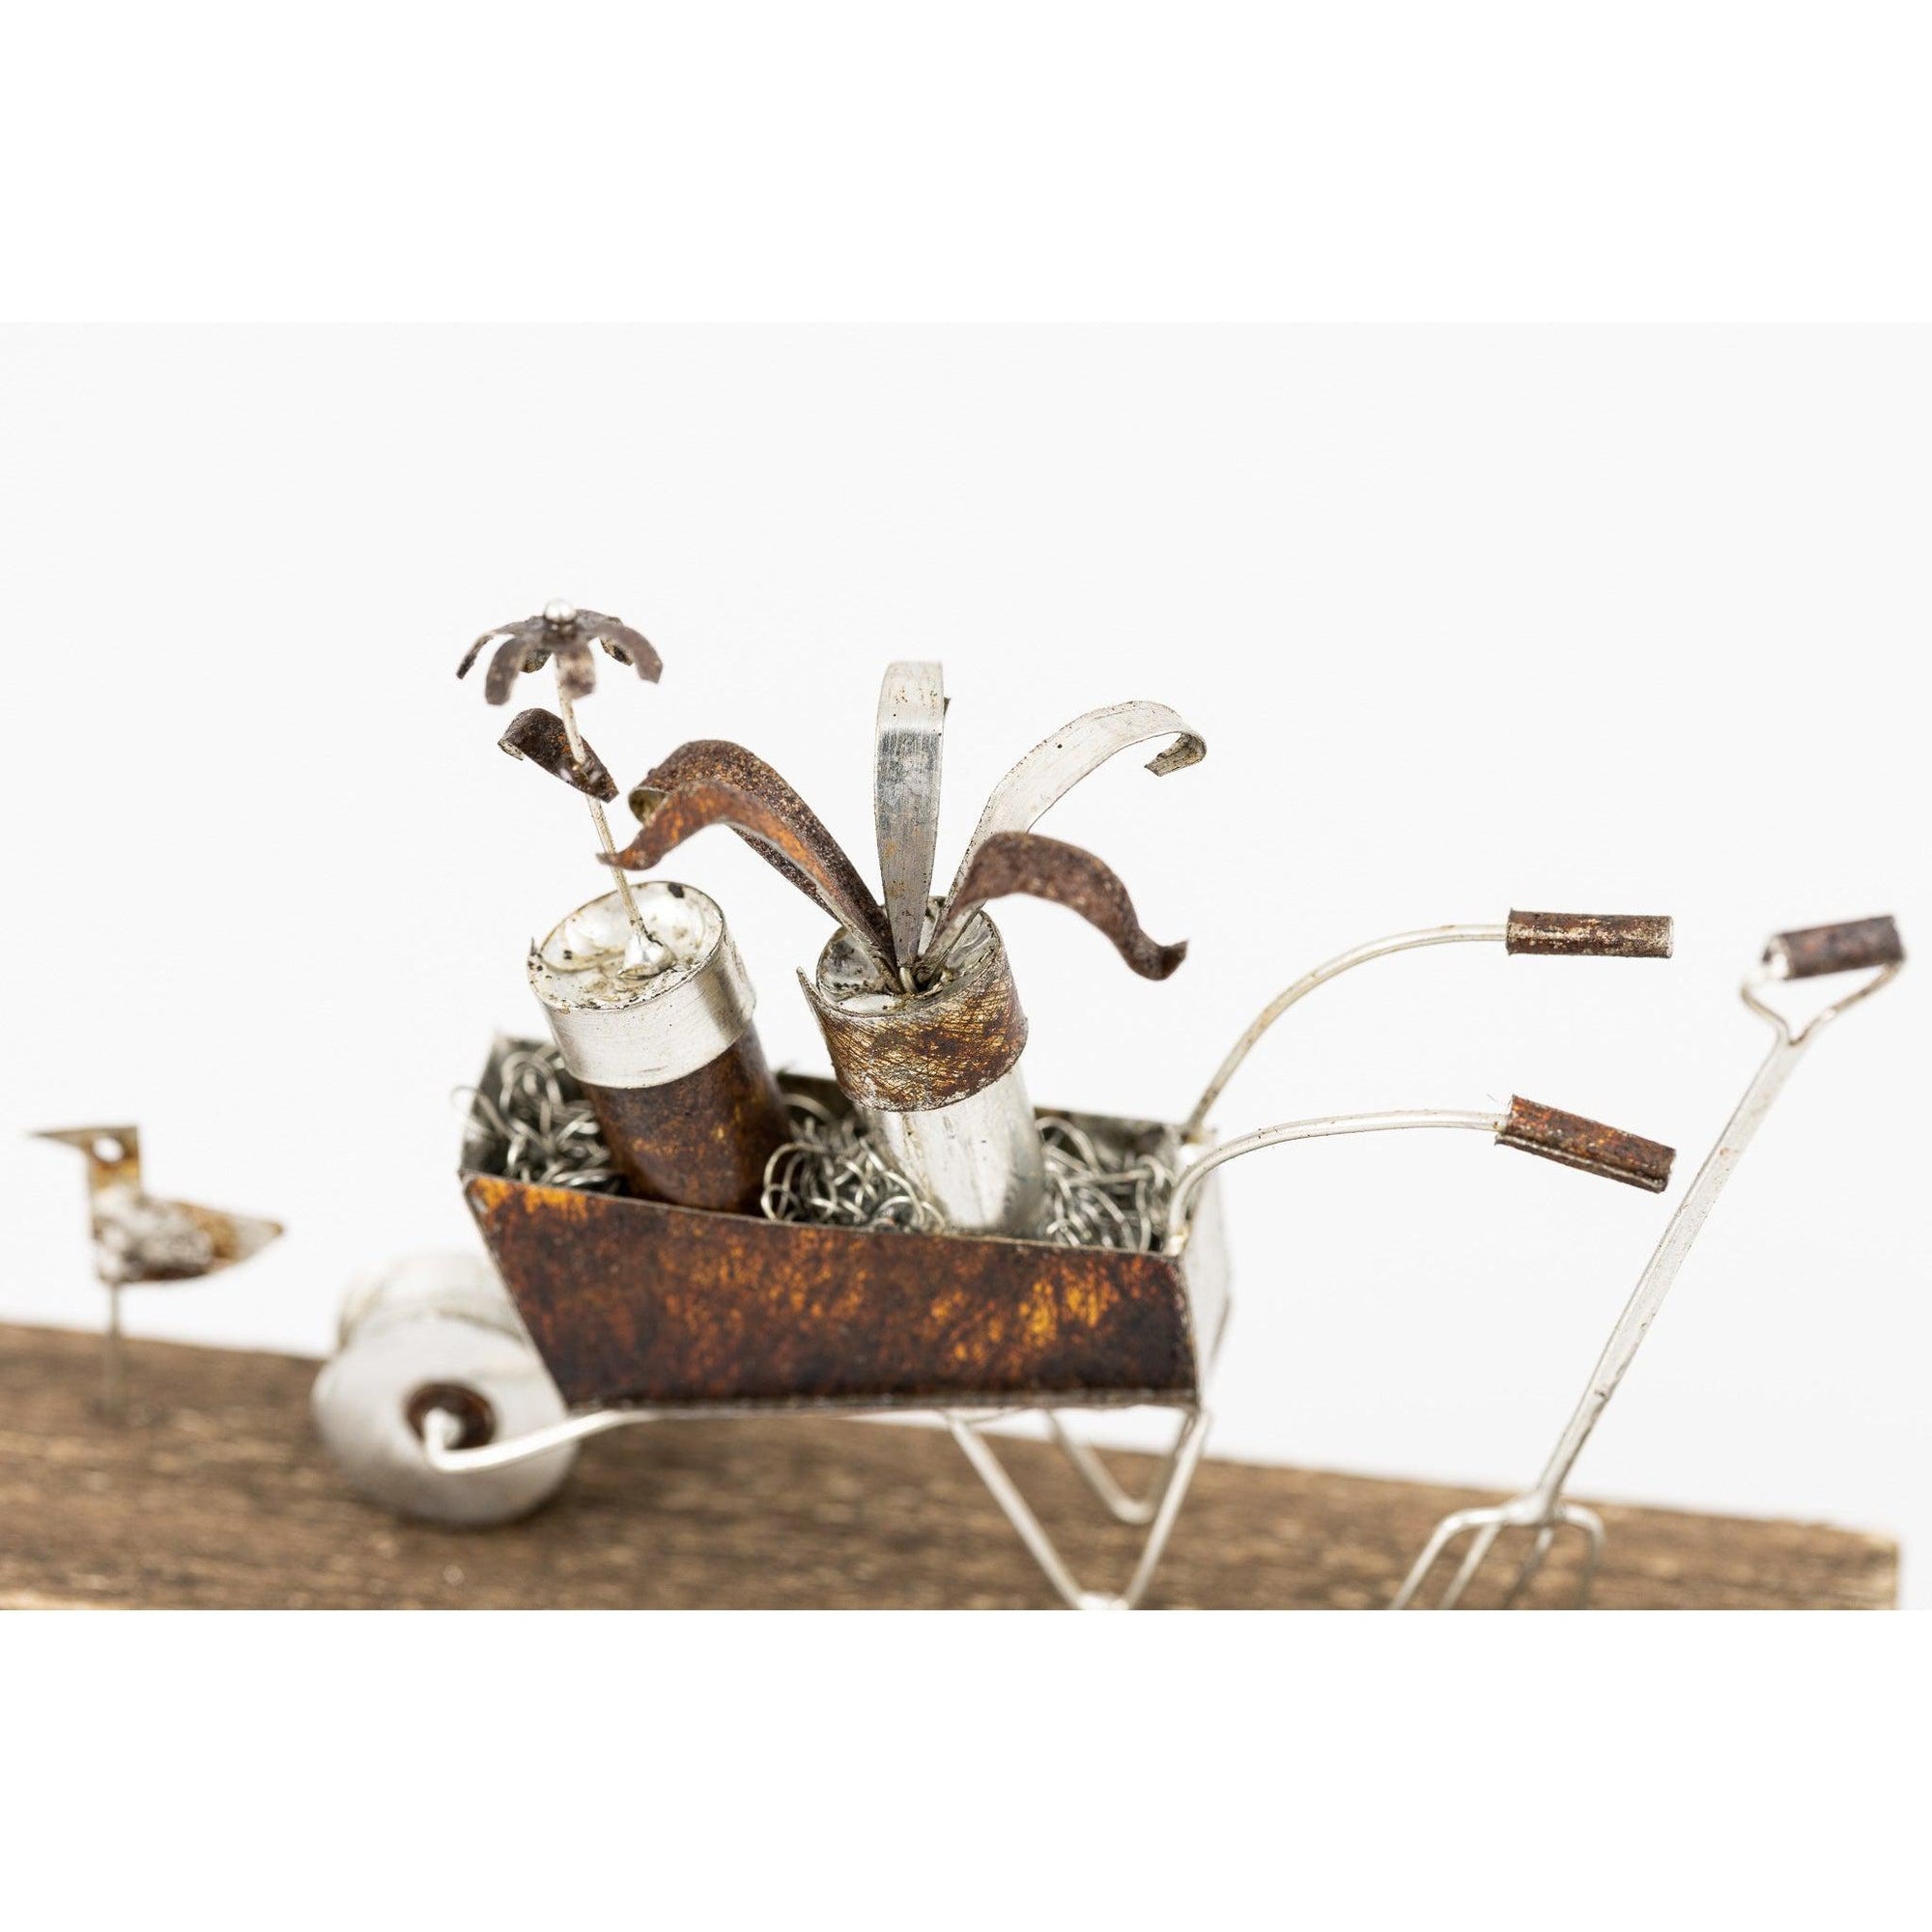 The Wheelbarrow by Sarah Jane Brown available at Padstow Gallery, Cornwall